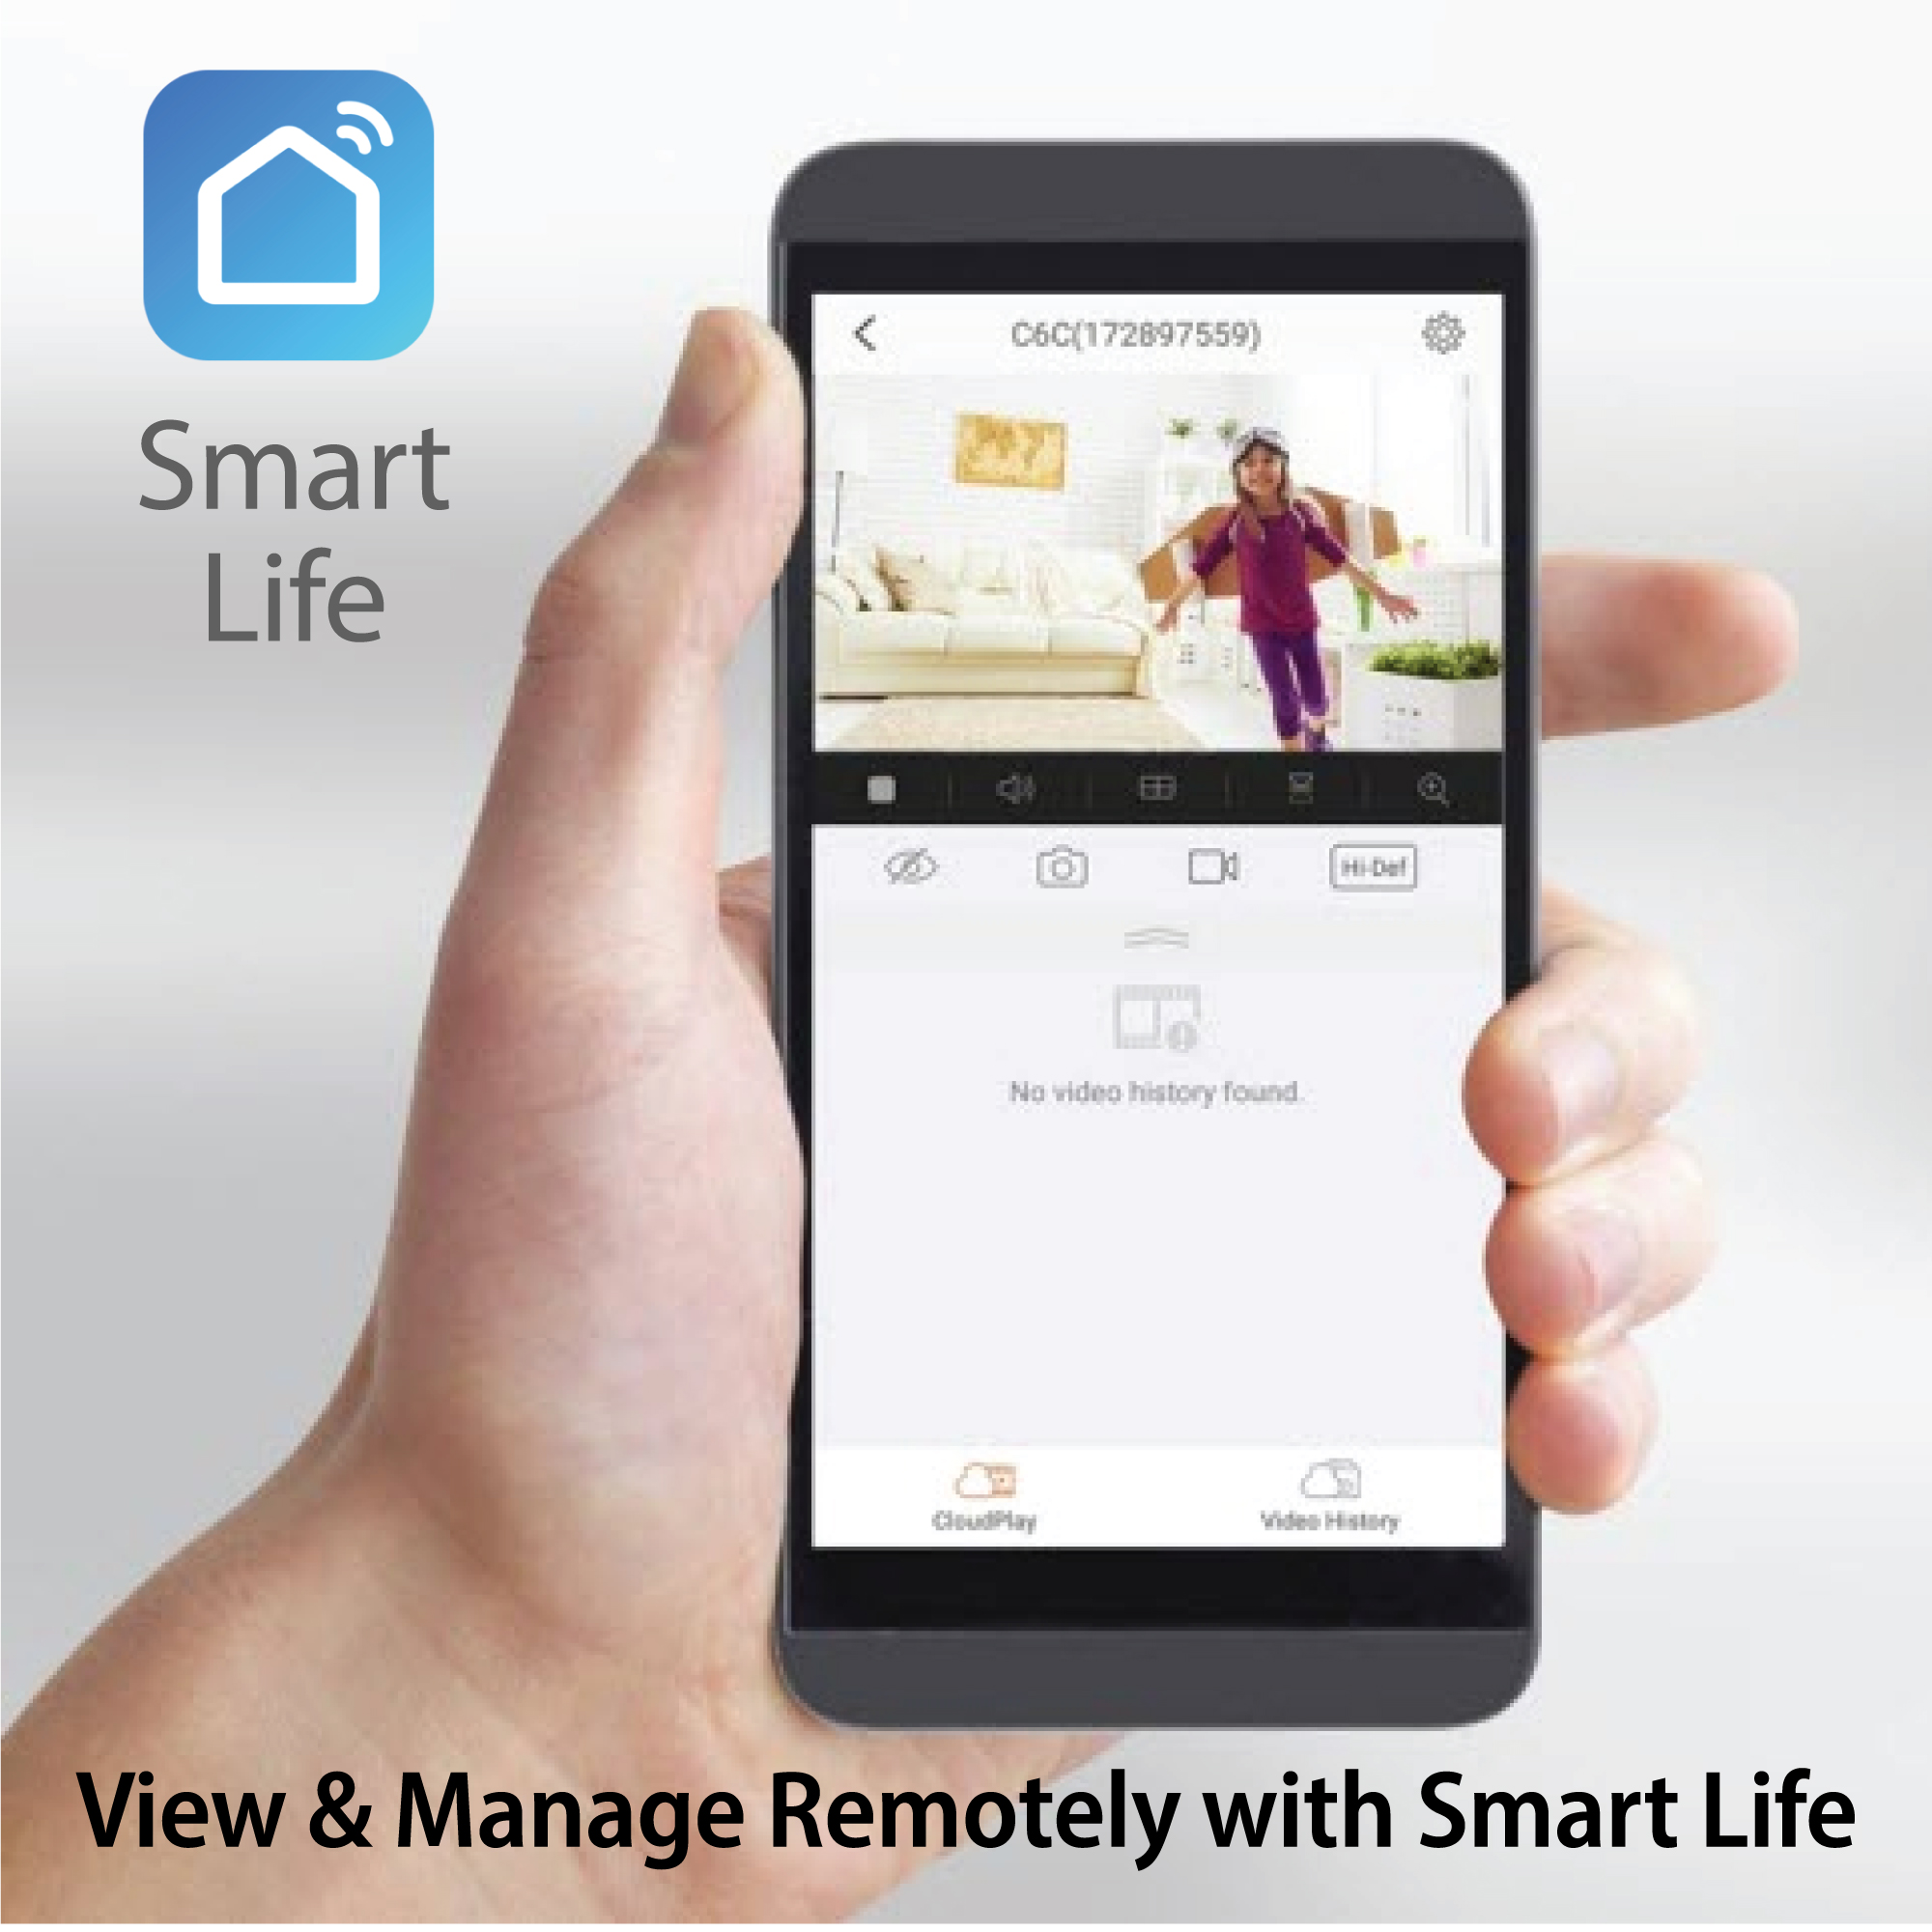 What Cameras Work With Smart Life App